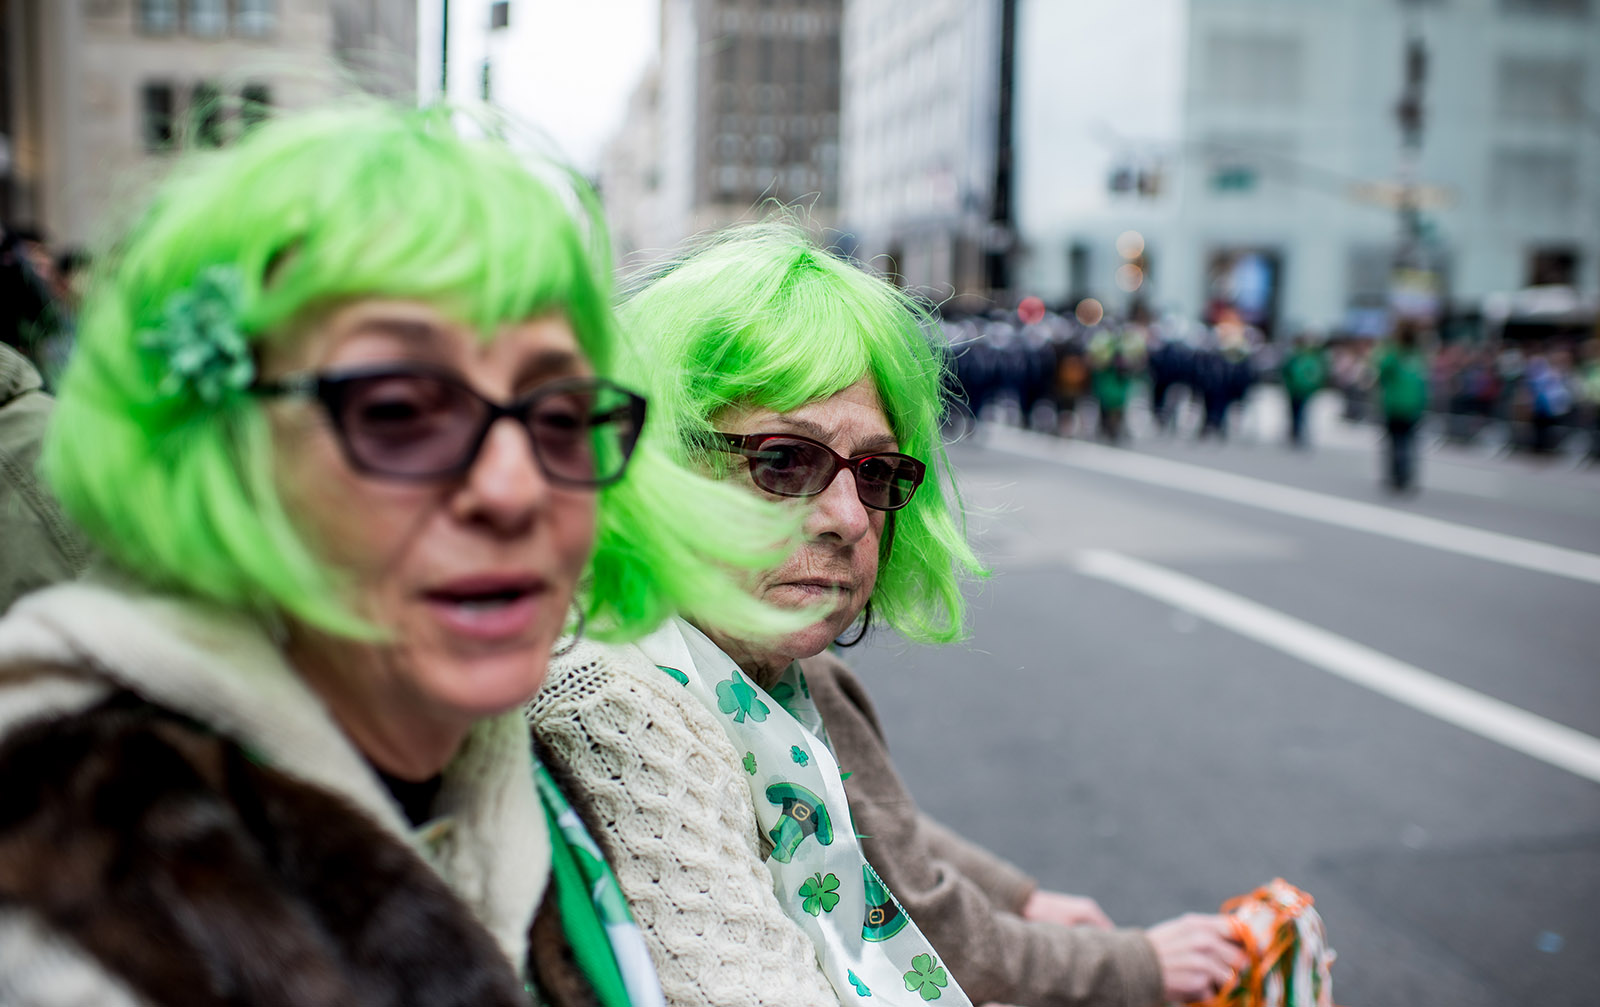 Spectators watching the St. Patrick's Day Parade, New York City, March 17, 2016